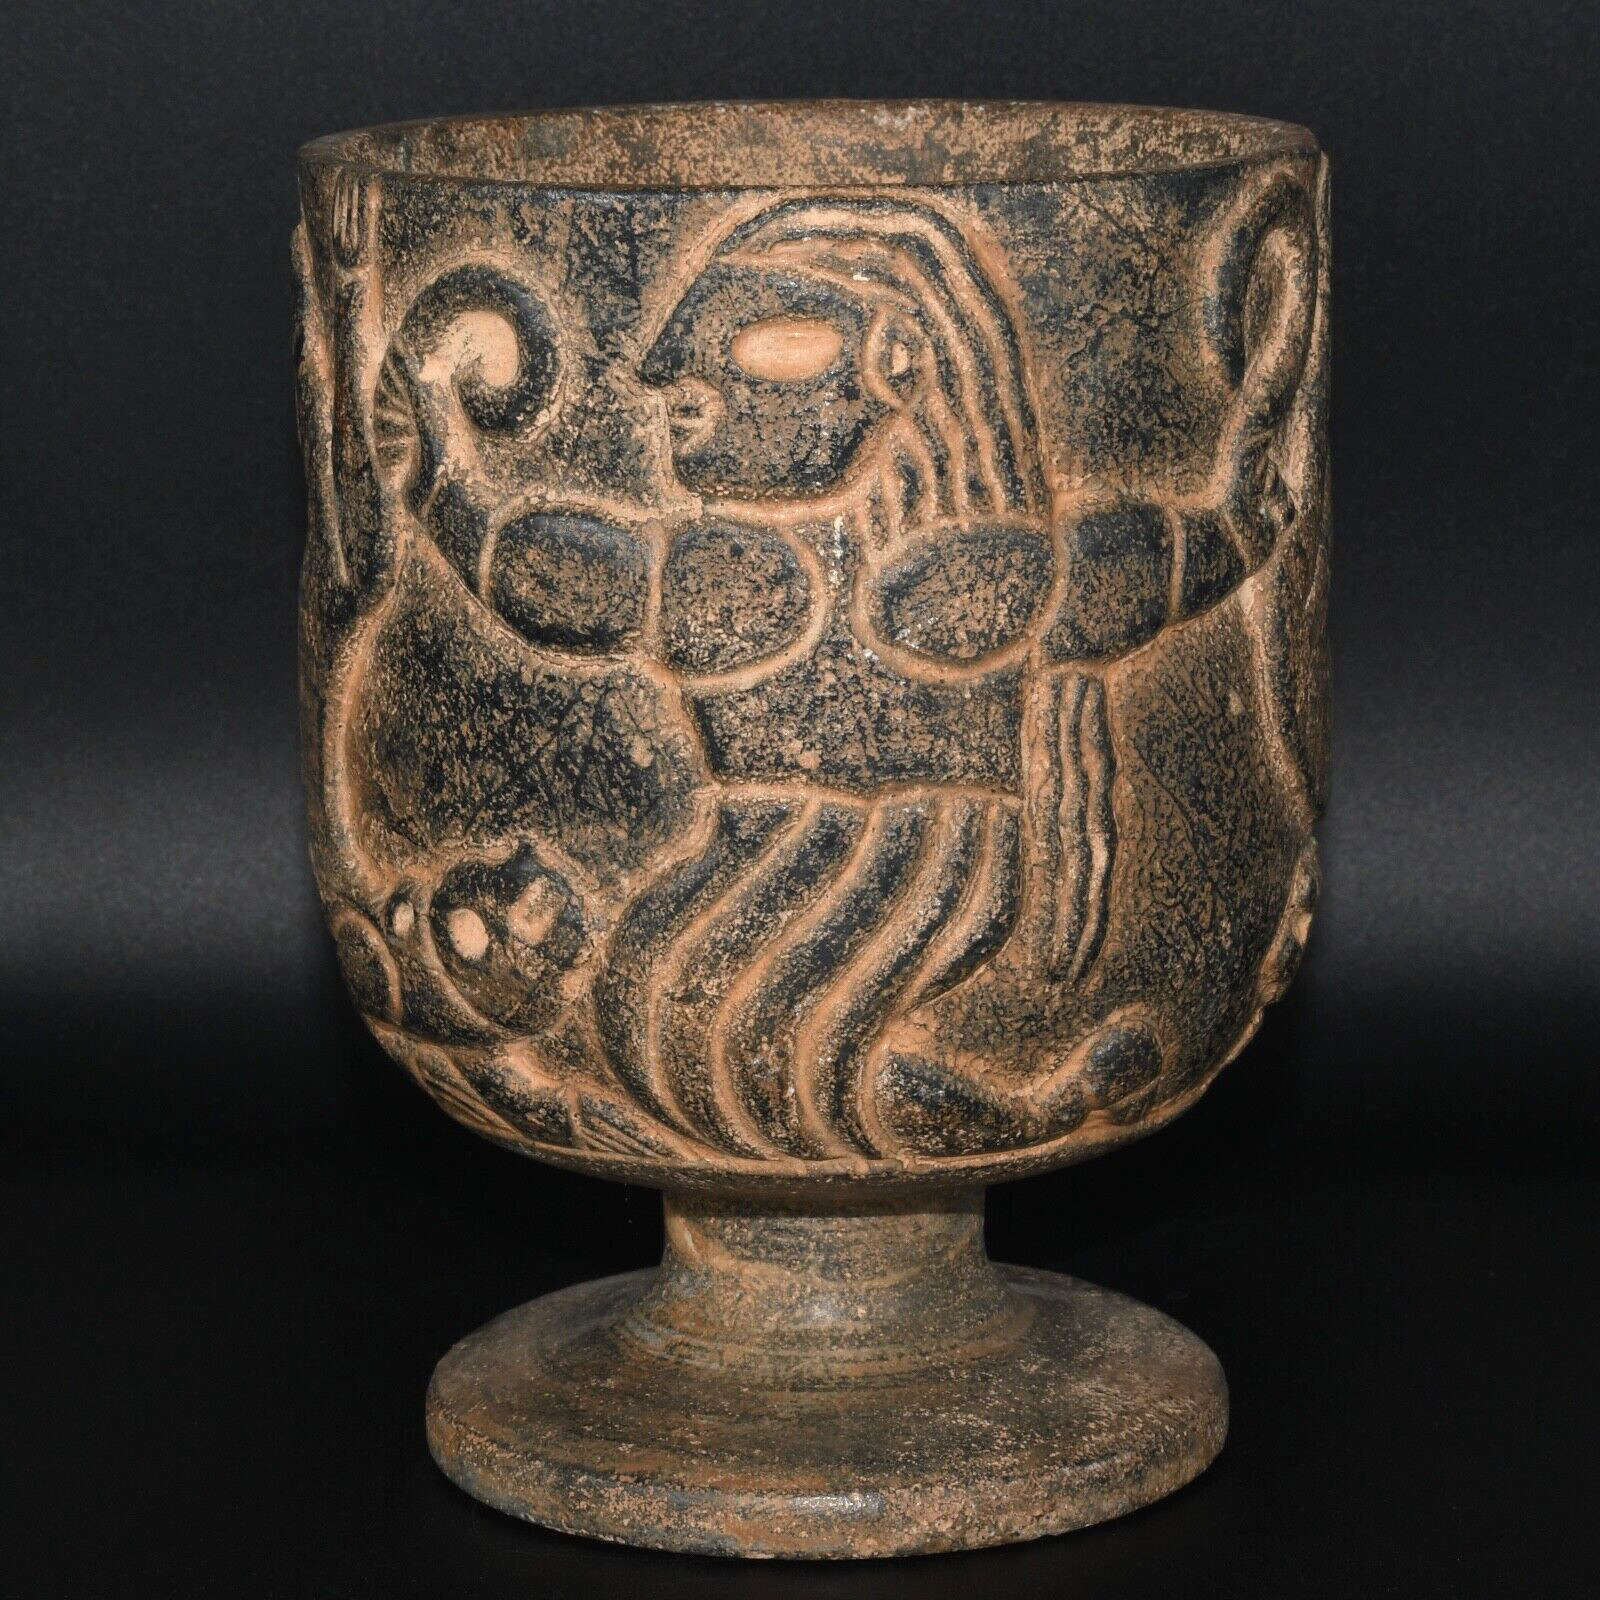 Intact Large Ancient Near Eastern Early Jiroft Civilization Stone Chalice Cup